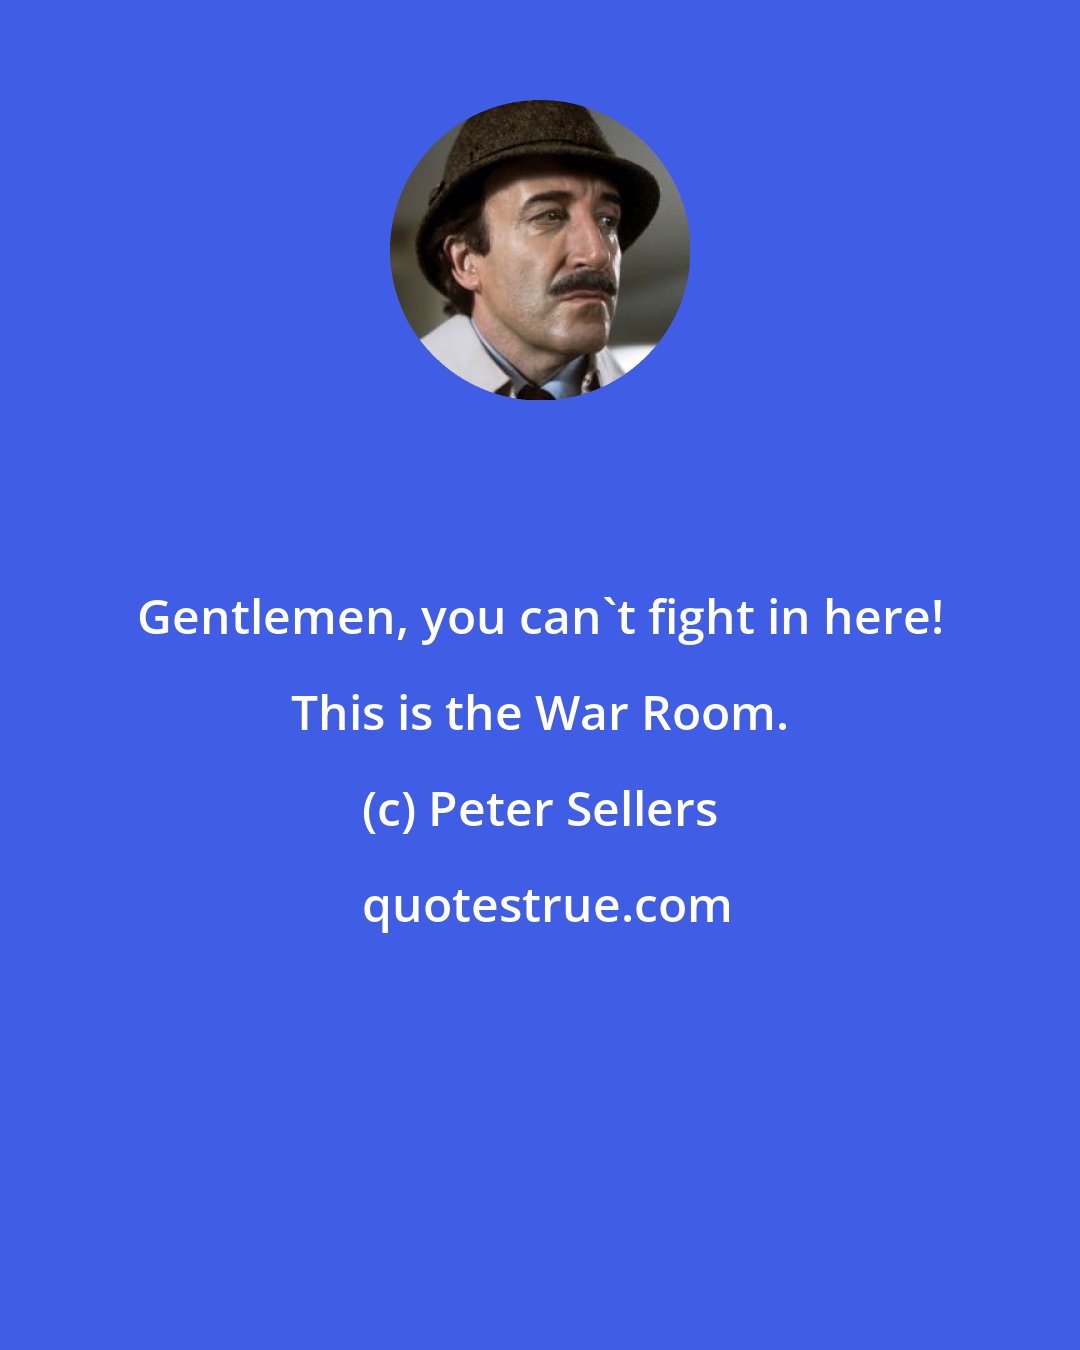 Peter Sellers: Gentlemen, you can't fight in here! This is the War Room.